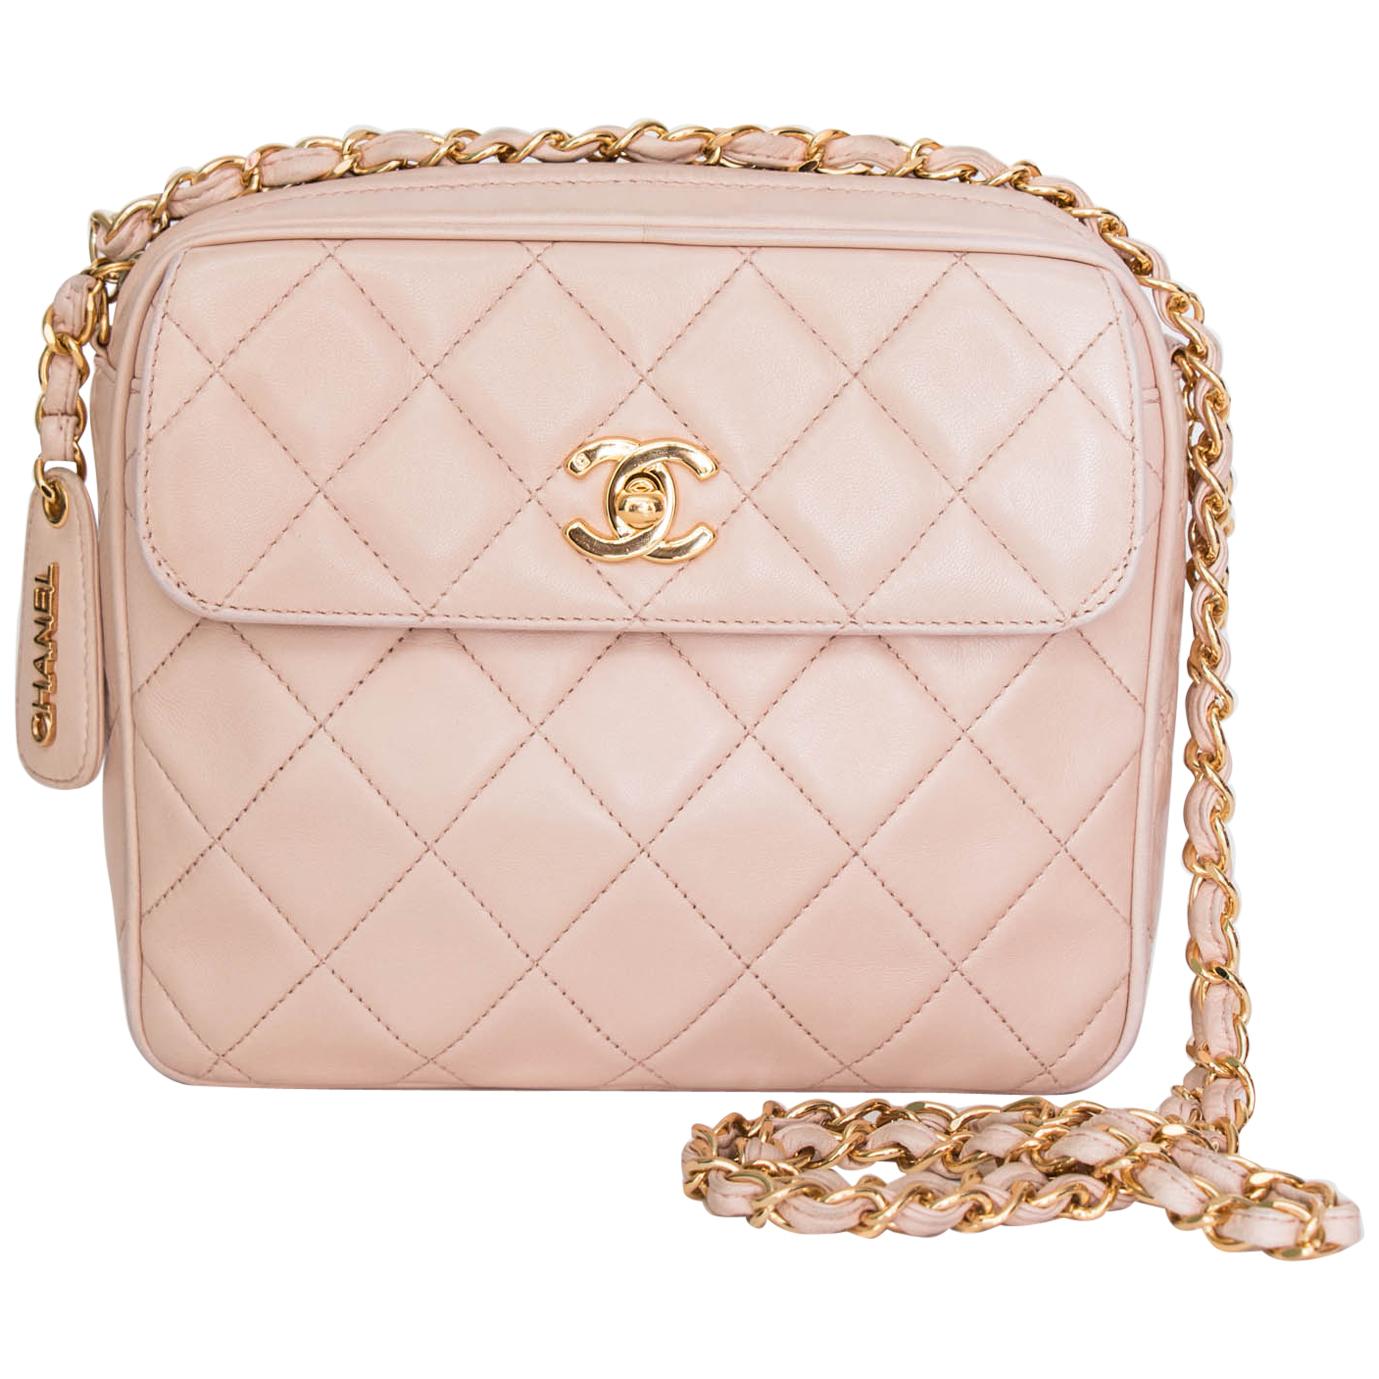 A 1990s Vintage Pink Crossbody Quilted Lambskin Bag With Gold Hardware